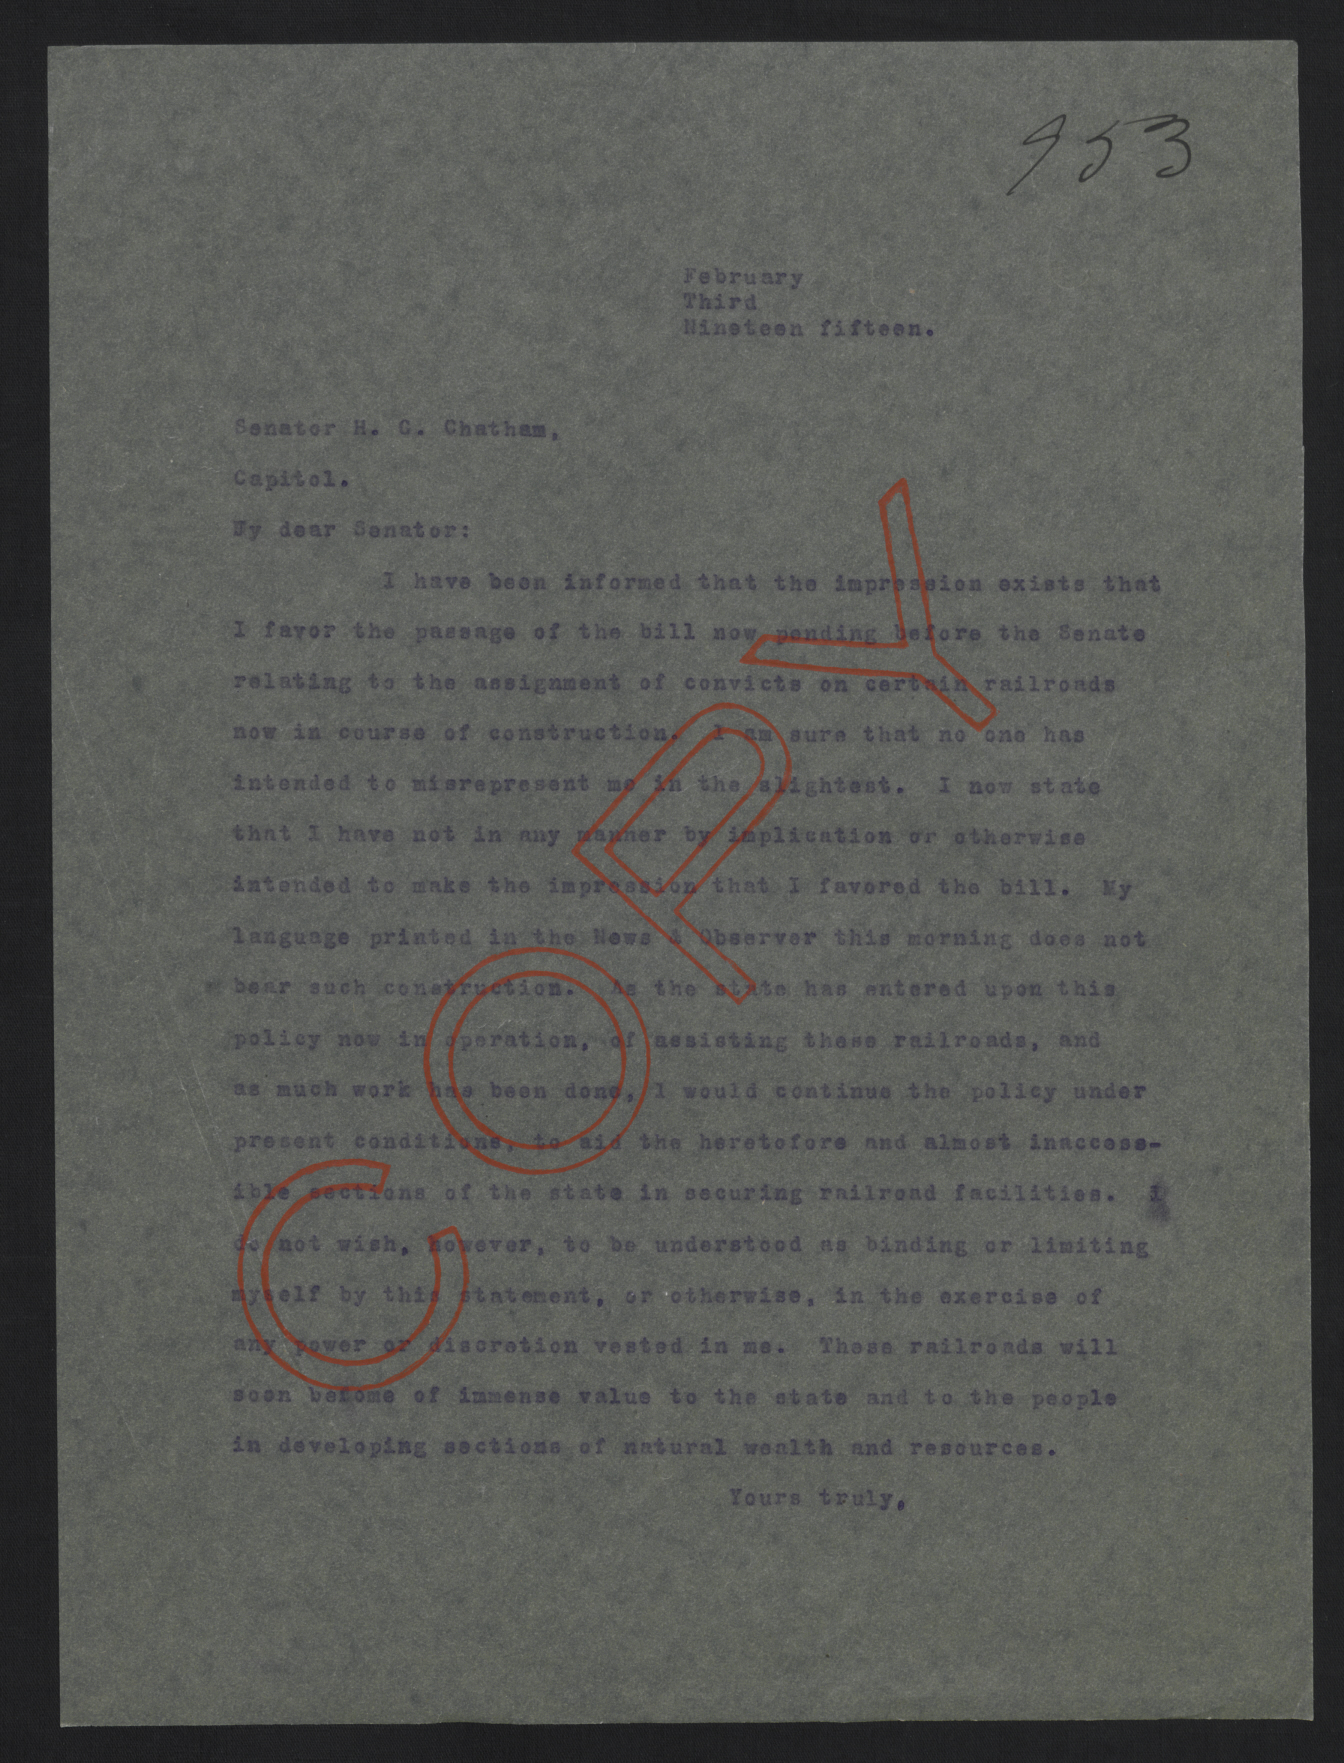 Letter from Craig to Chatham, February 3, 1915